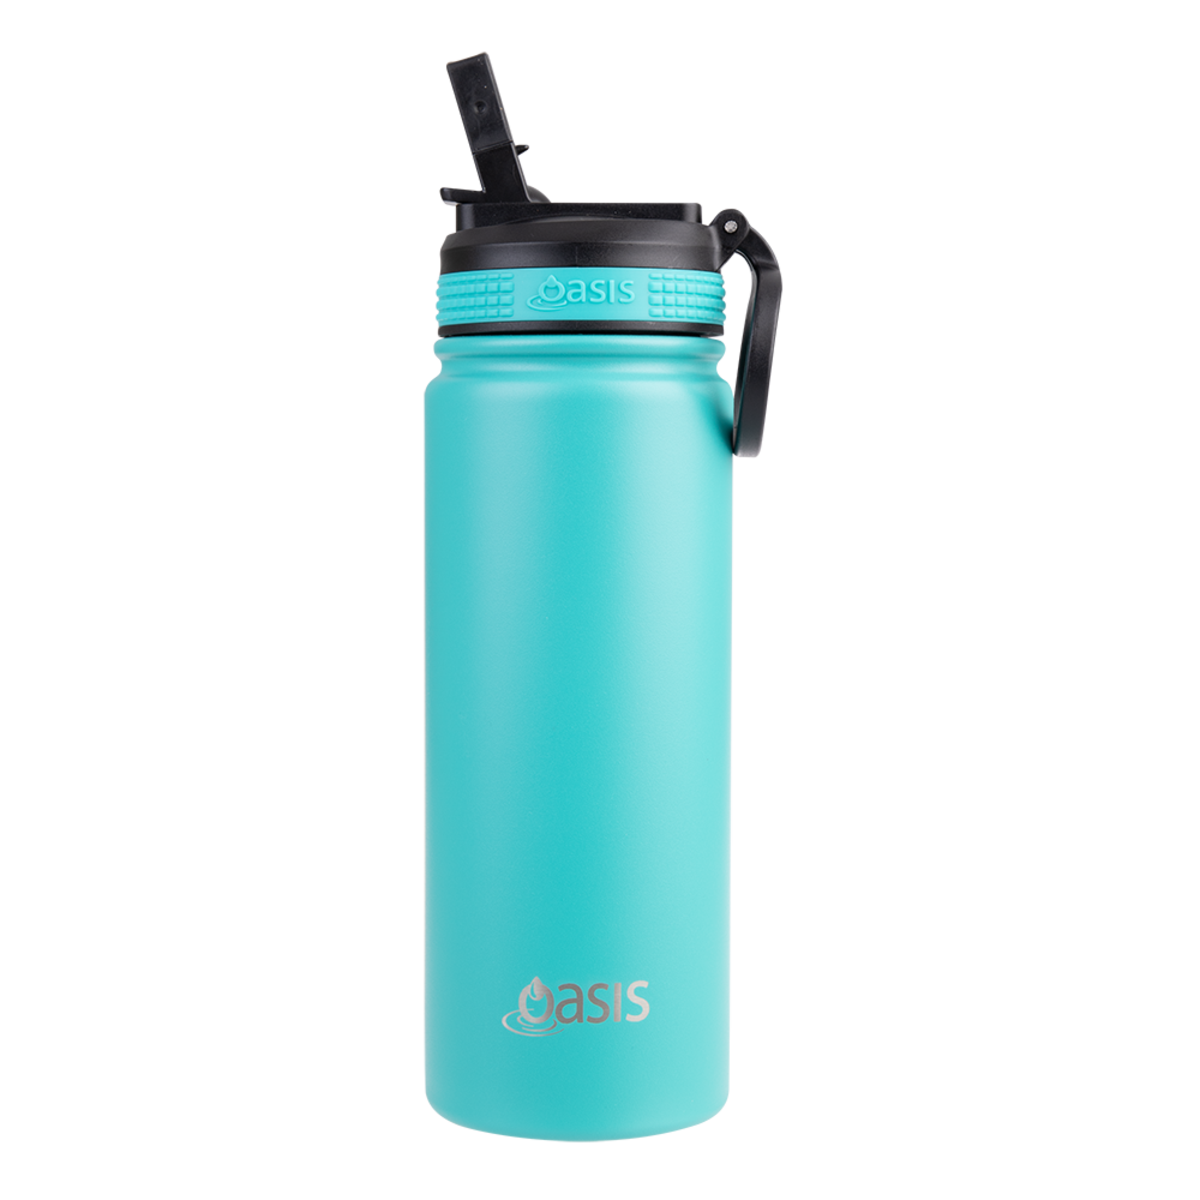 OASIS STAINLESS STEEL DOUBLE WALL INSULATED "CHALLENGER" SPORTS BOTTLE WITH SIPPER STRAW 550ML  TURQUOISE